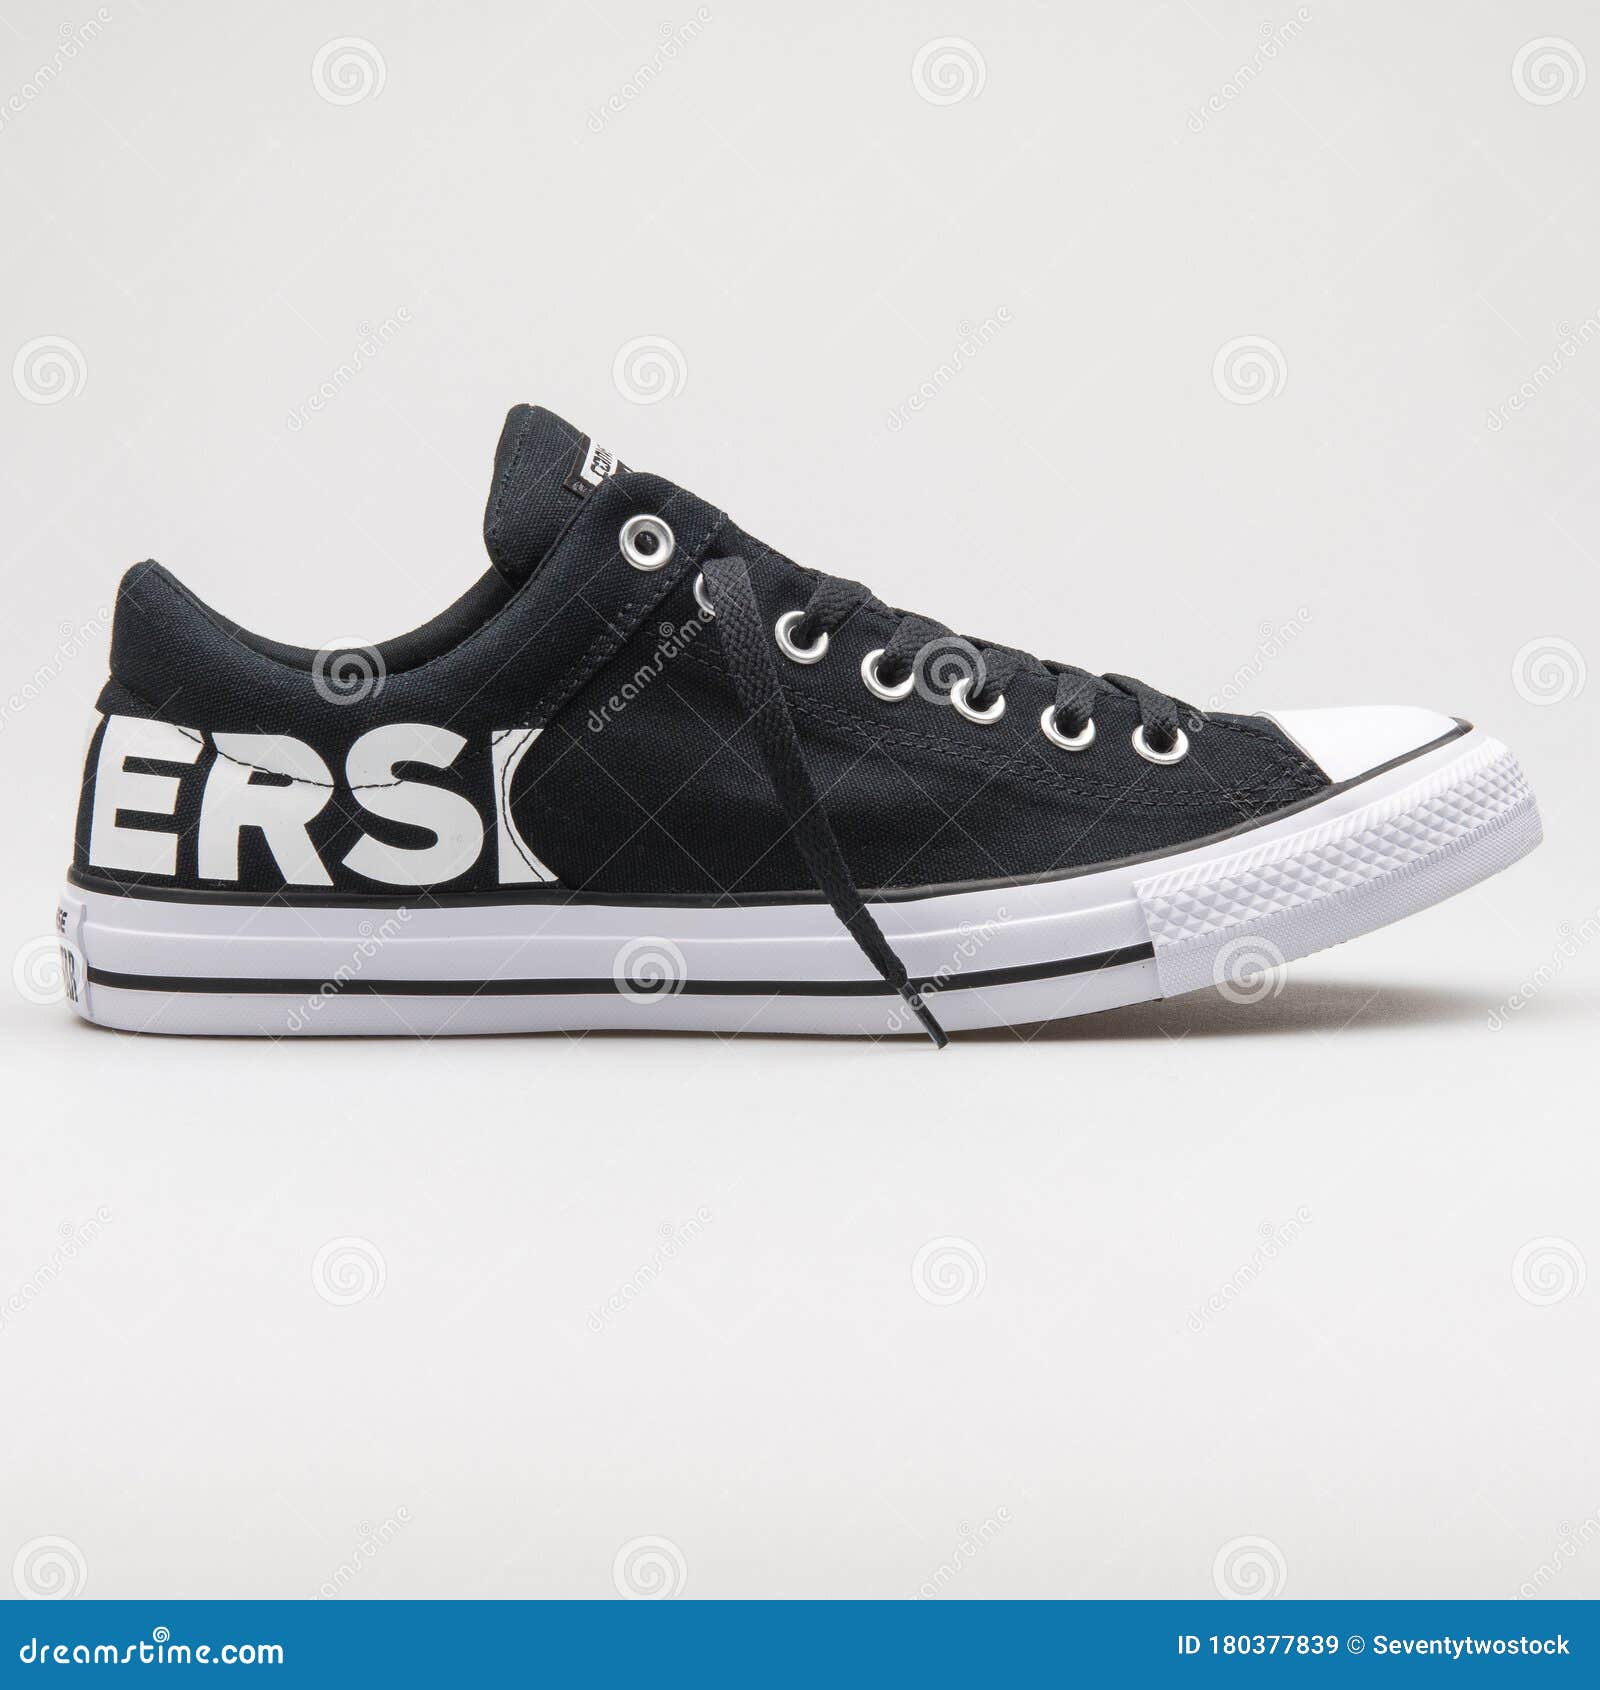 nadar Intermedio inferencia Converse Chuck Taylor All Star High Street OX Black and White Sneaker  Editorial Stock Image - Image of back, fashion: 180377839